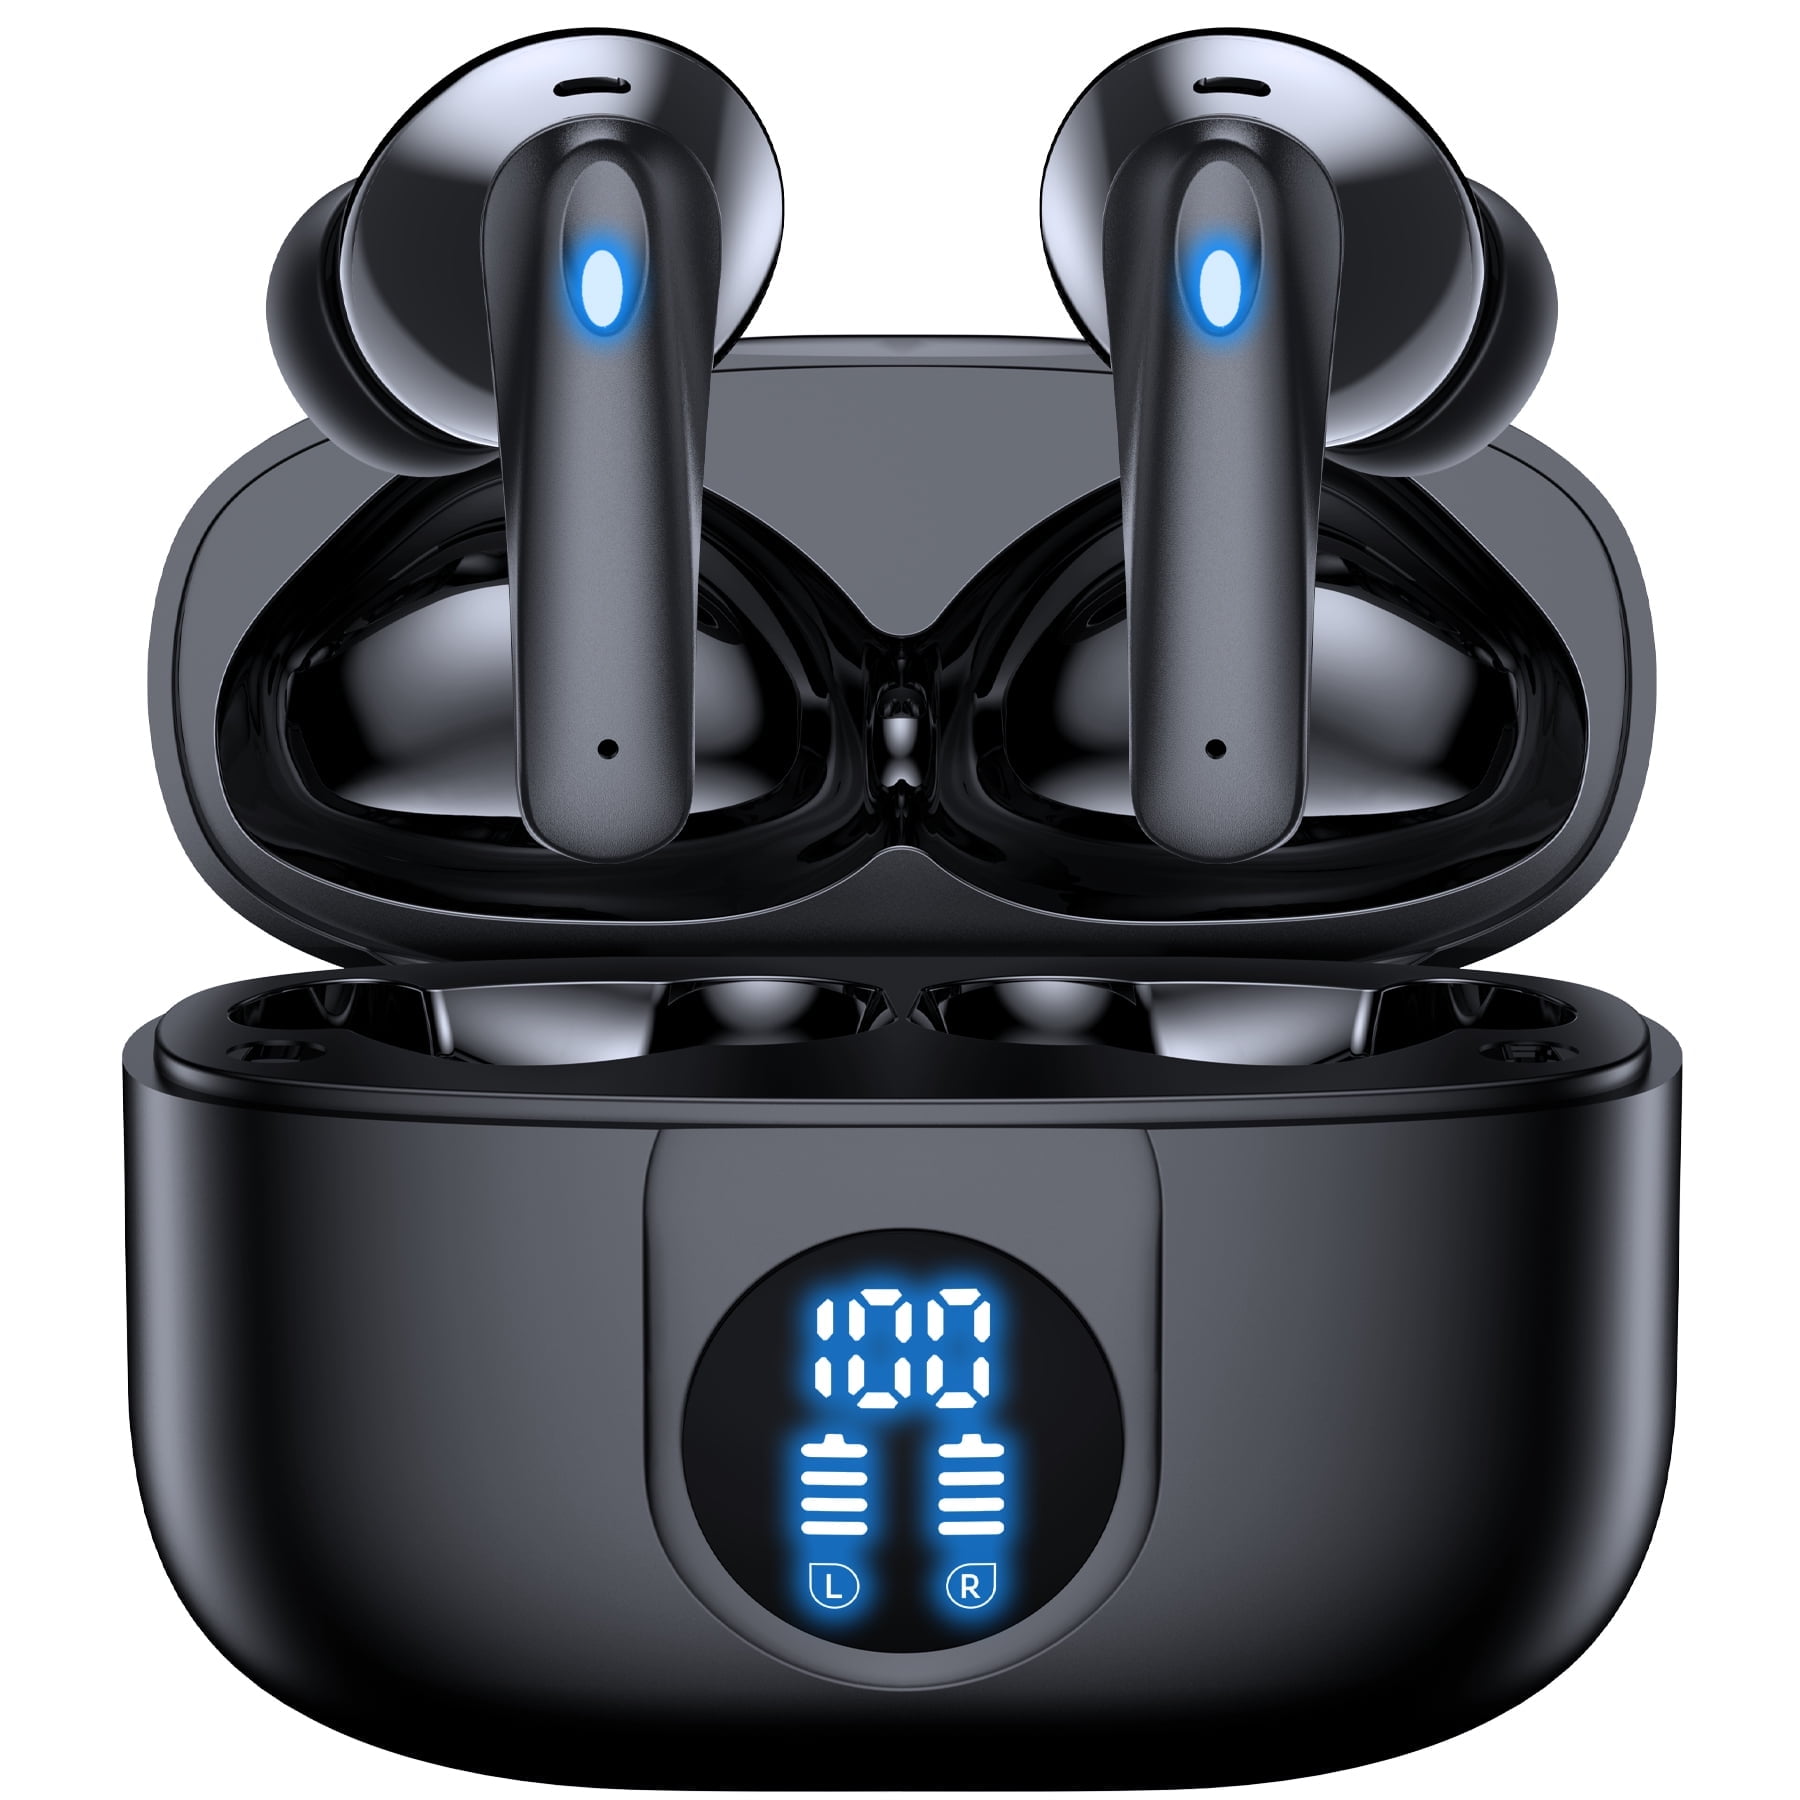 VEAT00L Wireless earbuds, Bluetooth headset 60 hours of battery life with noise cancellation Clear calls Built-in microphone IPX7 waterproof V5.3 Bluetooth earbuds earbuds for sports and work - Walmart.com